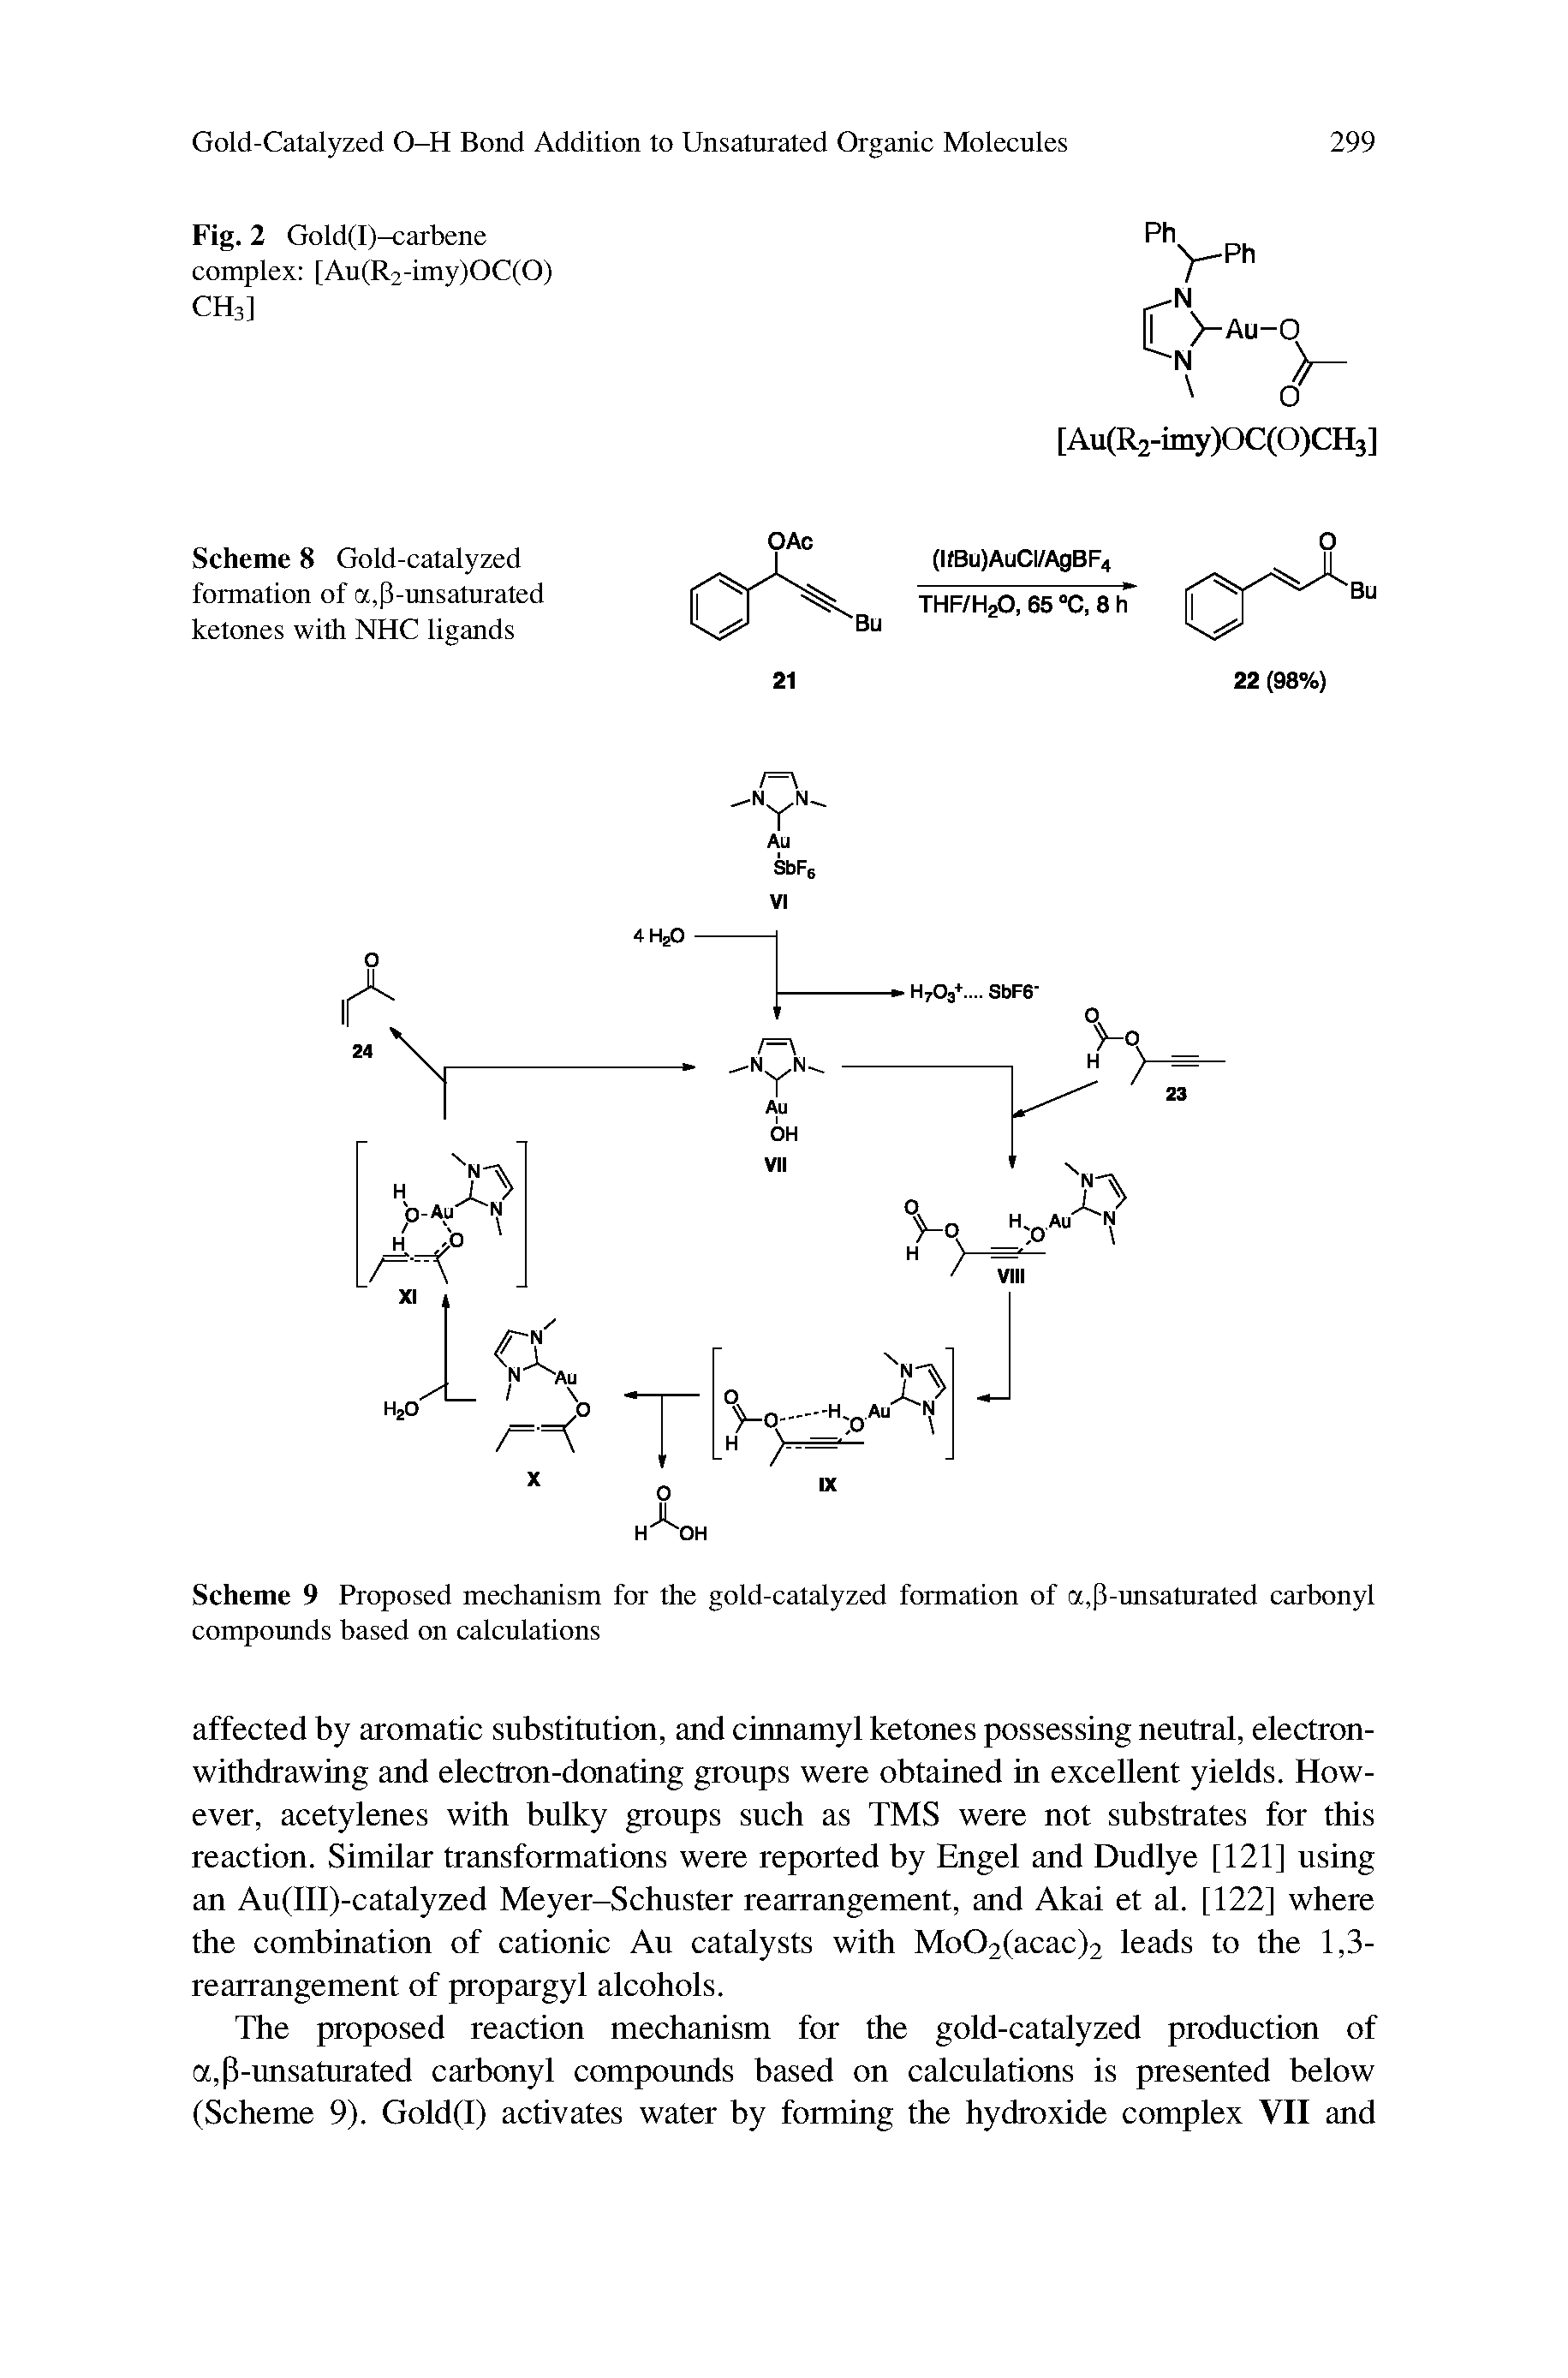 Scheme 9 Proposed mechanism for the gold-catalyzed formation of a,P-unsaturated carbonyl compounds based on calculations...